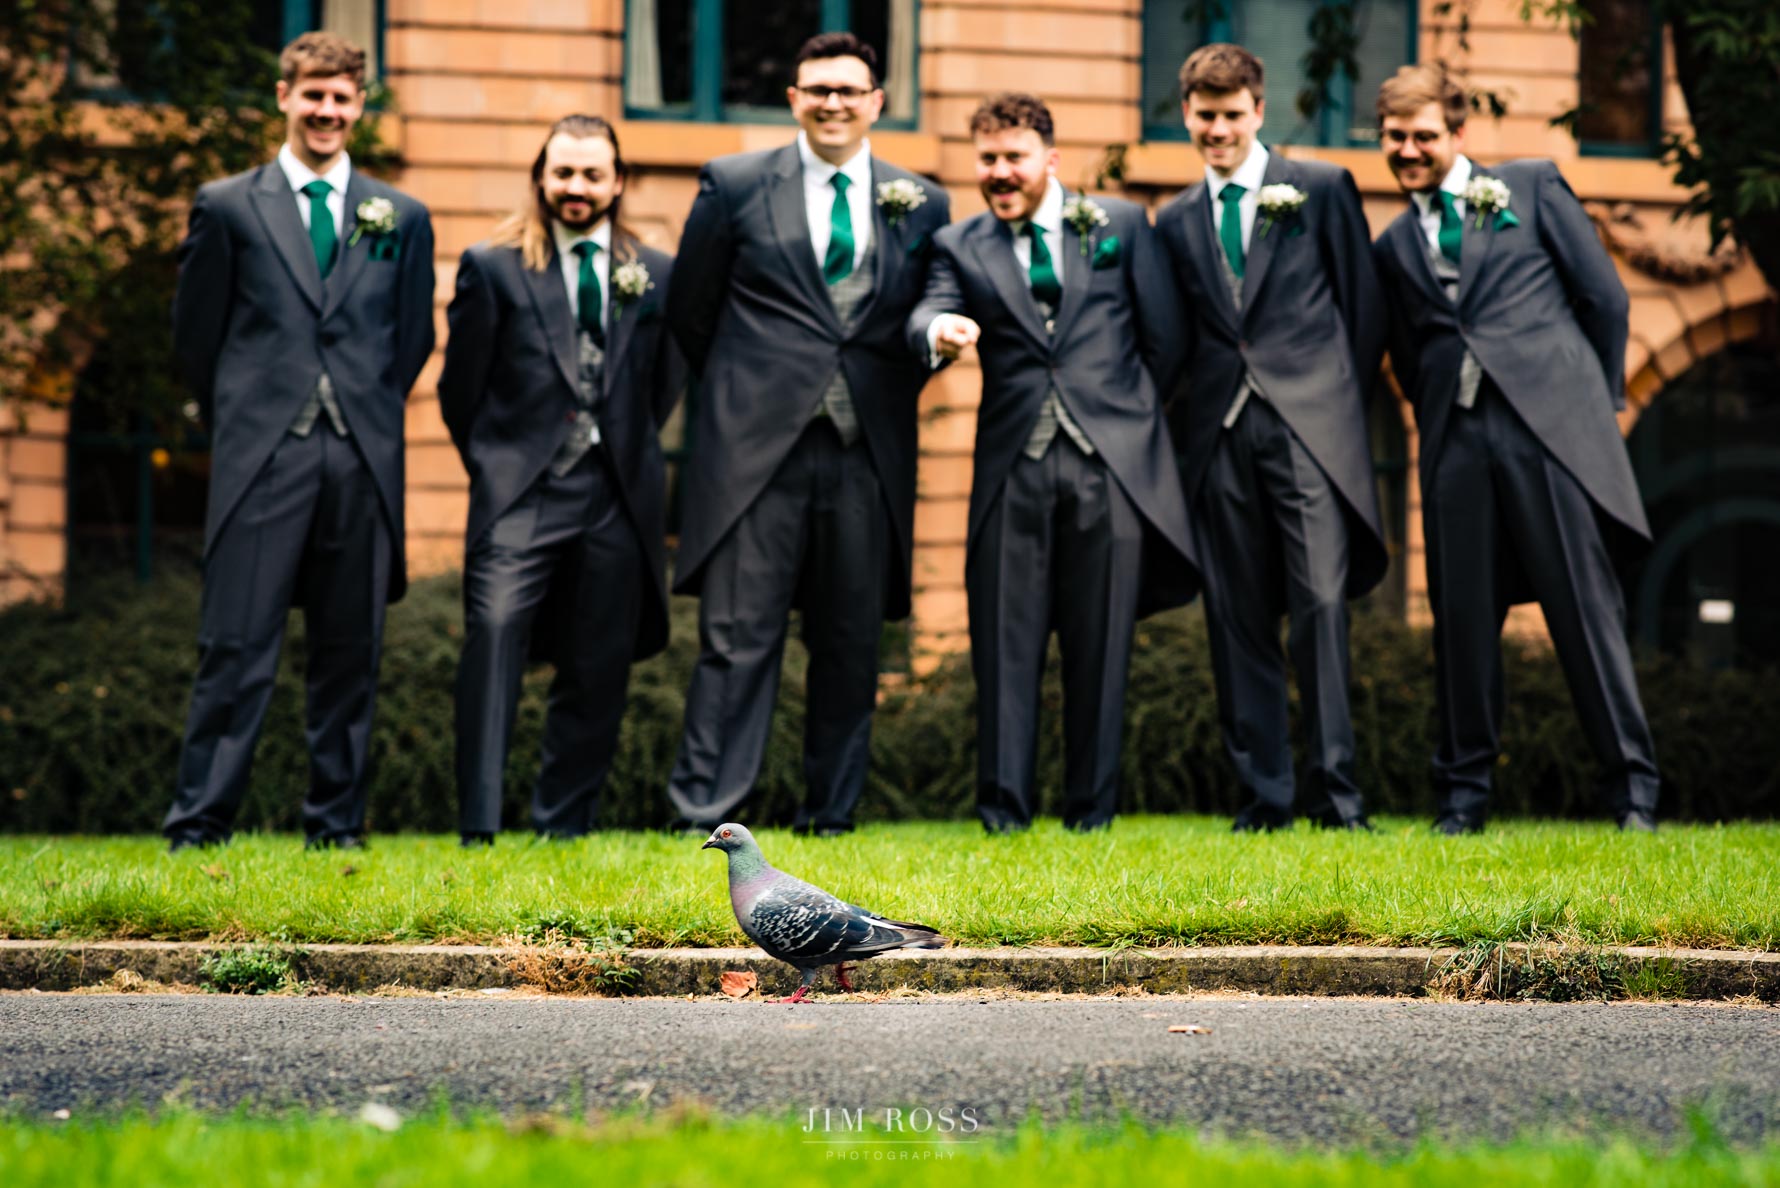 pigeon matches groomsmen outfits